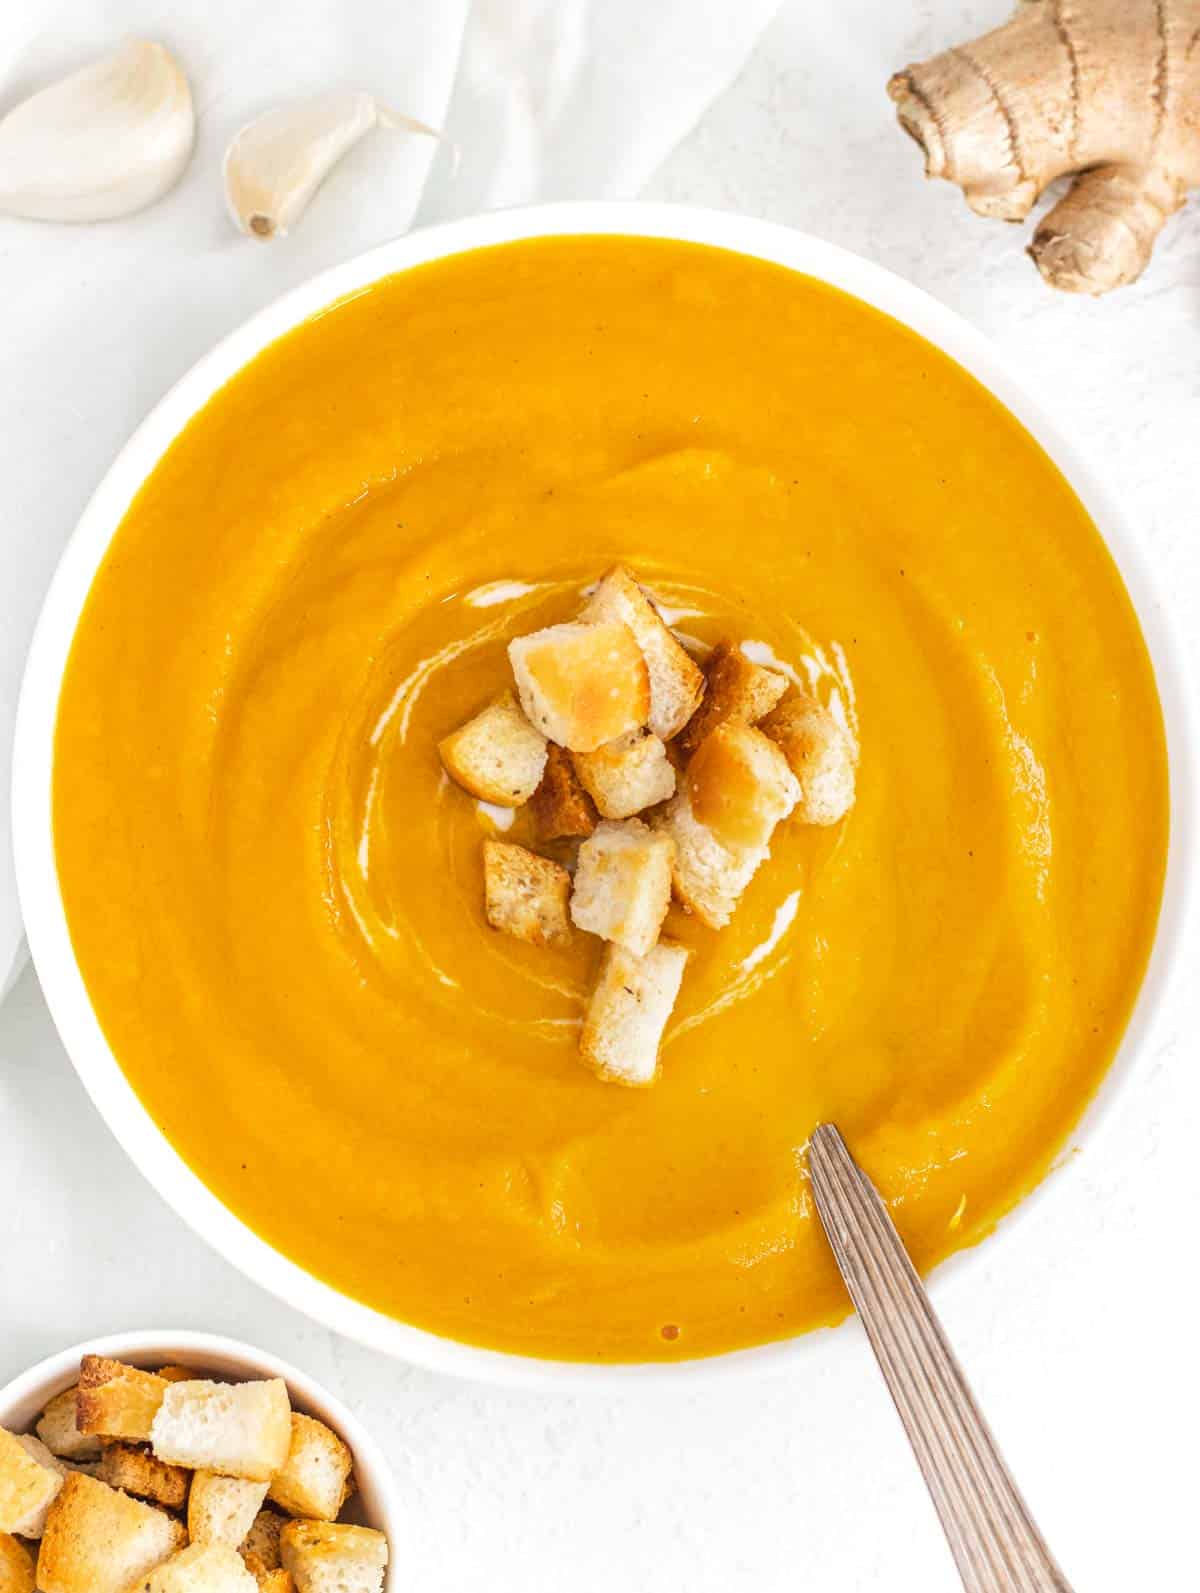 Carrot soup with croutons